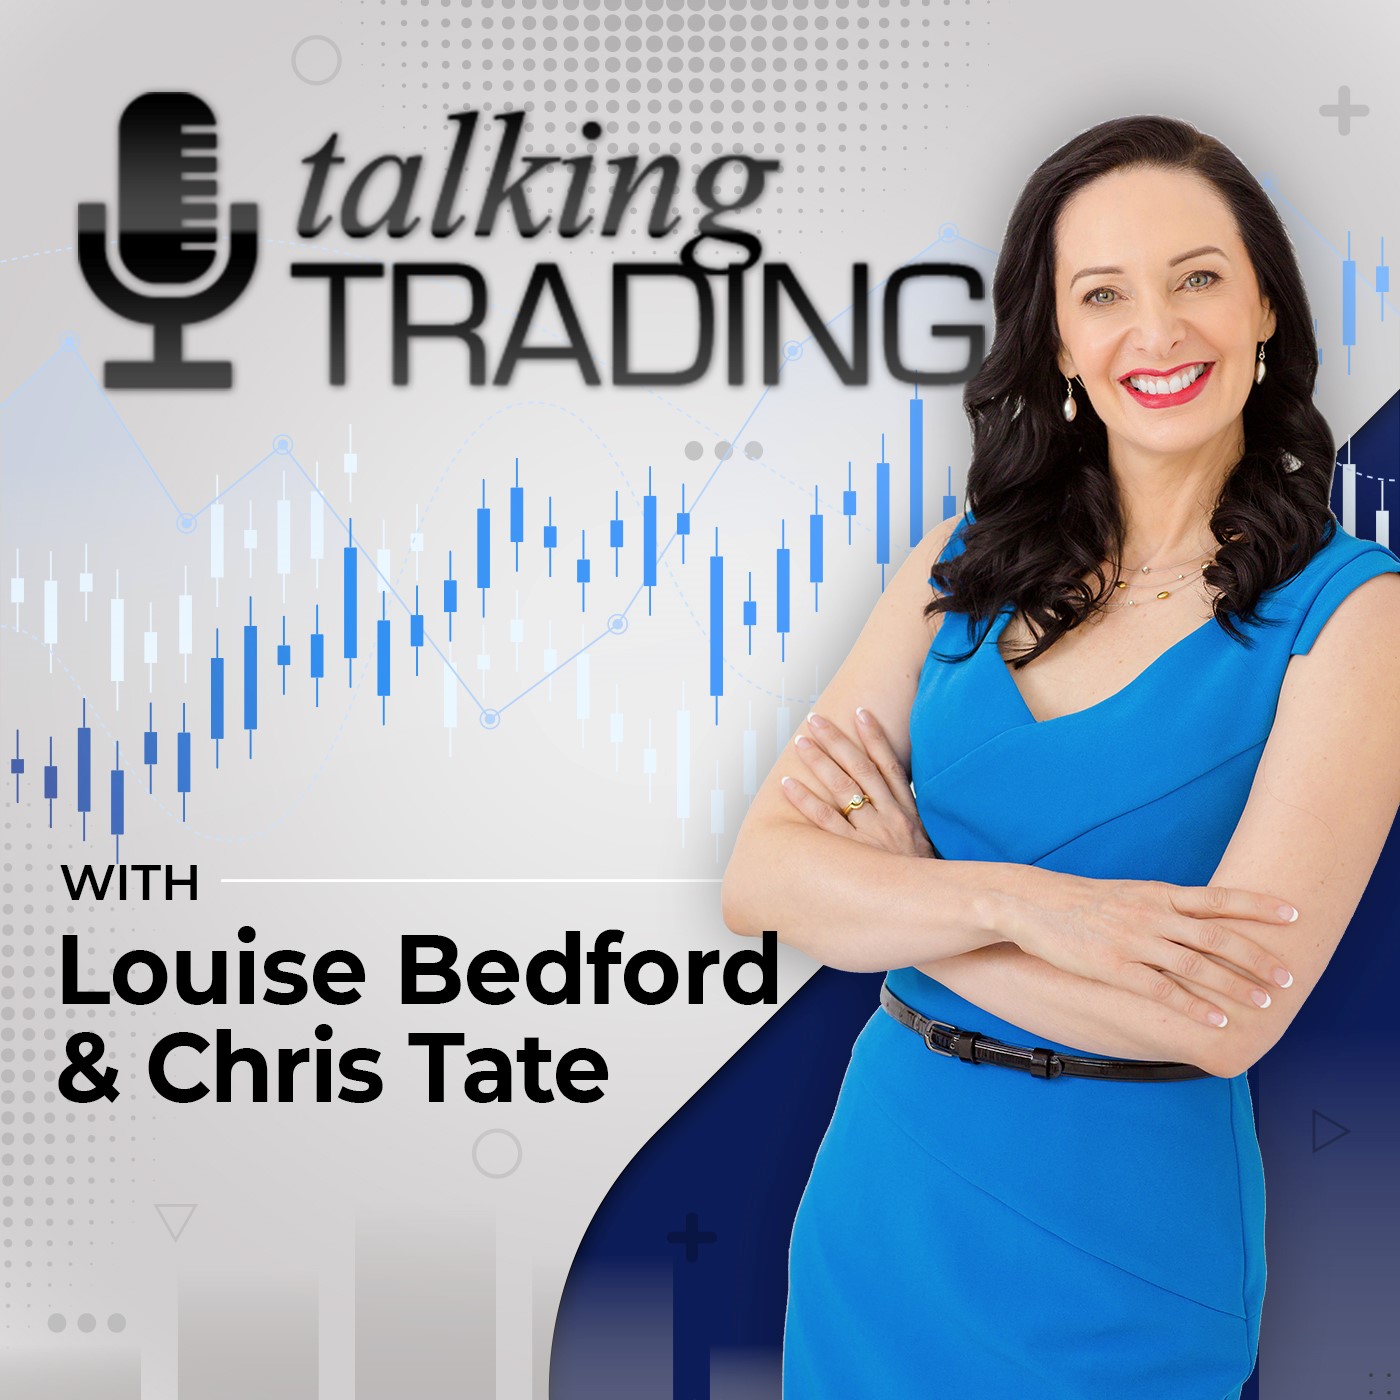 Talking Trading - Your free weekly trading podcast, showcasing the world's best traders, trading tips, strategies and more.